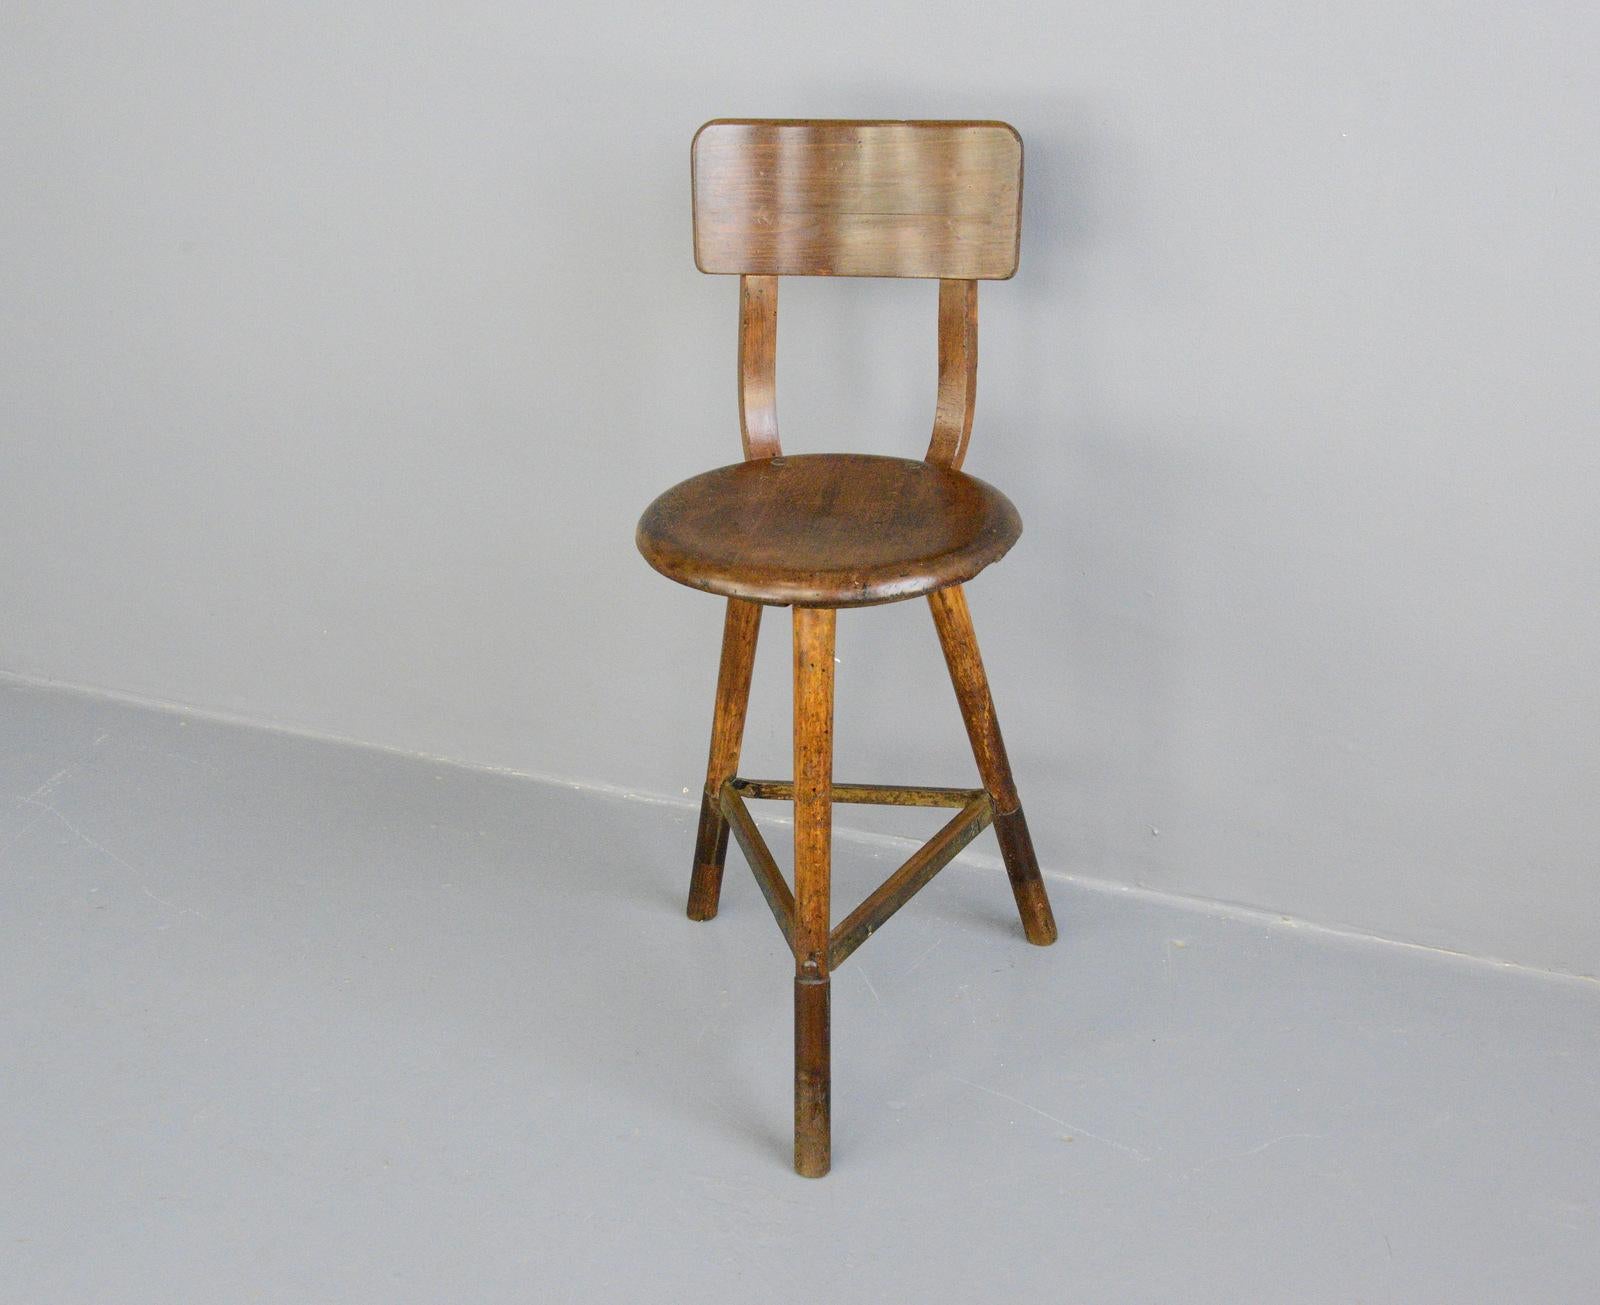 Industrial work stool by Ama, circa 1920s

- Solid elm seat 
- Bentwood beech back
- Designed by Albert Menger
- Produced by Ama, Nordhalben
- German ~ 1920s
- 39cm wide x 43cm deep x 92cm tall
- 62cm seat height

Condition